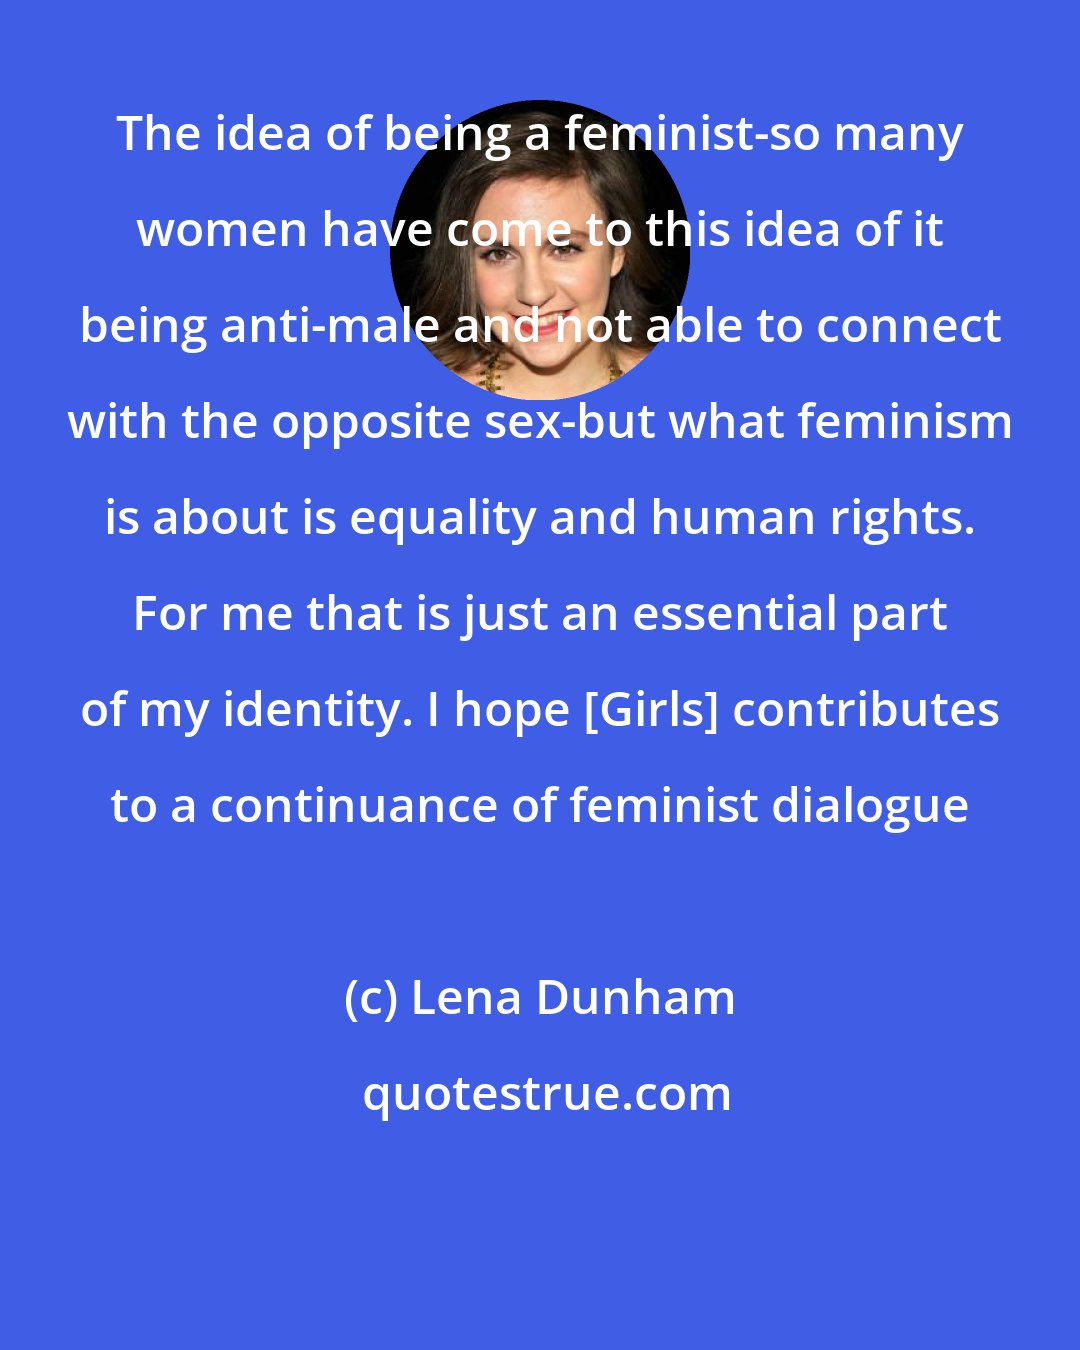 Lena Dunham: The idea of being a feminist-so many women have come to this idea of it being anti-male and not able to connect with the opposite sex-but what feminism is about is equality and human rights. For me that is just an essential part of my identity. I hope [Girls] contributes to a continuance of feminist dialogue